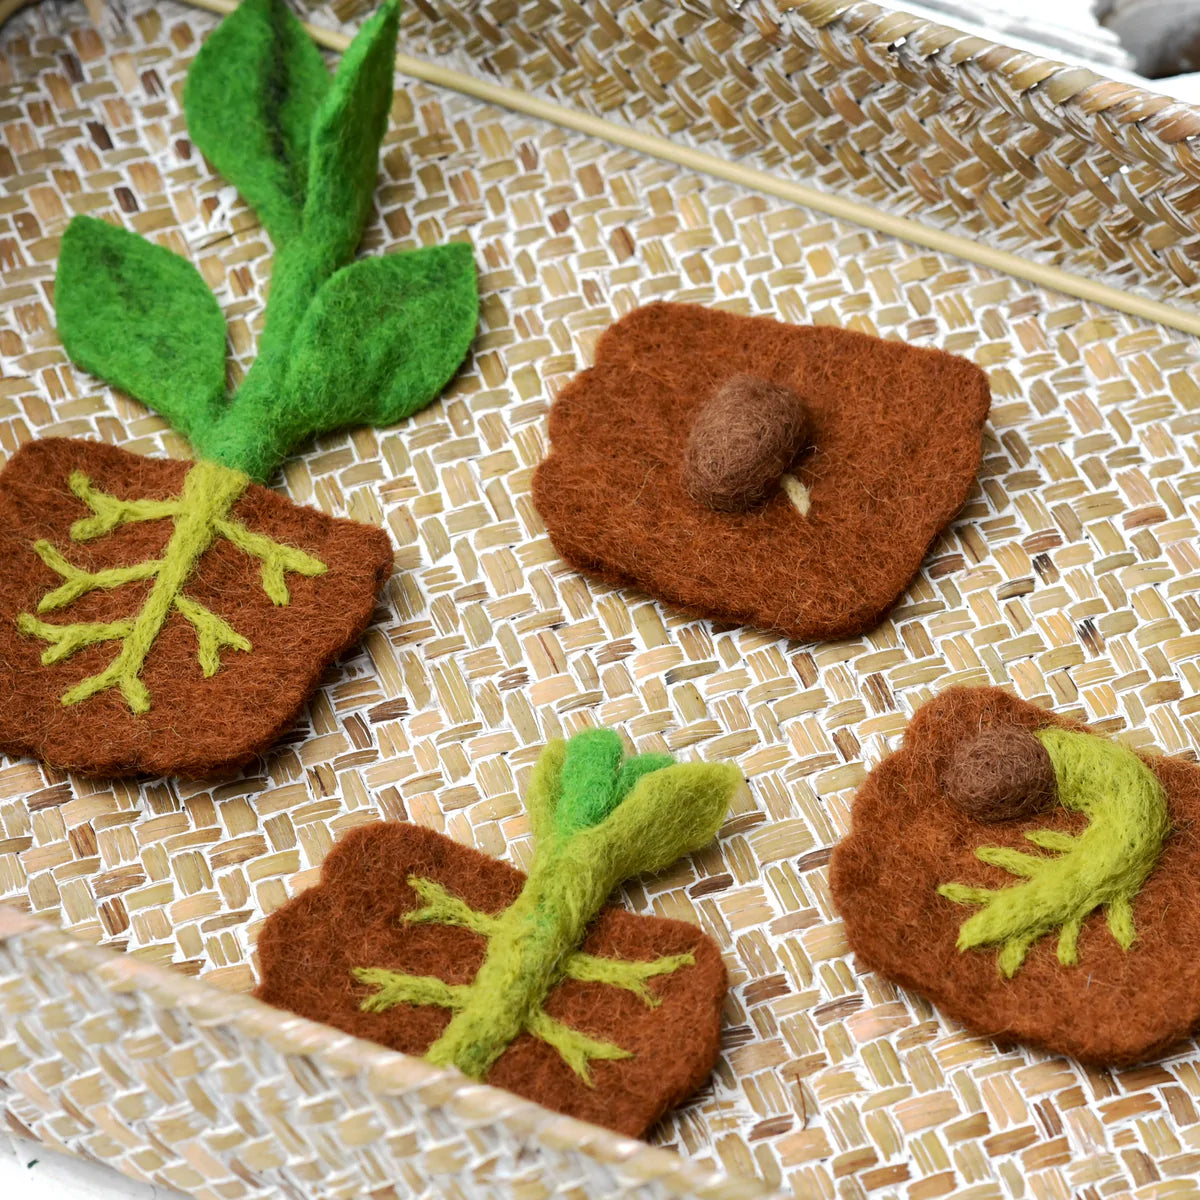 Felt Lifecycle of Bean Plant (mat sold separately)